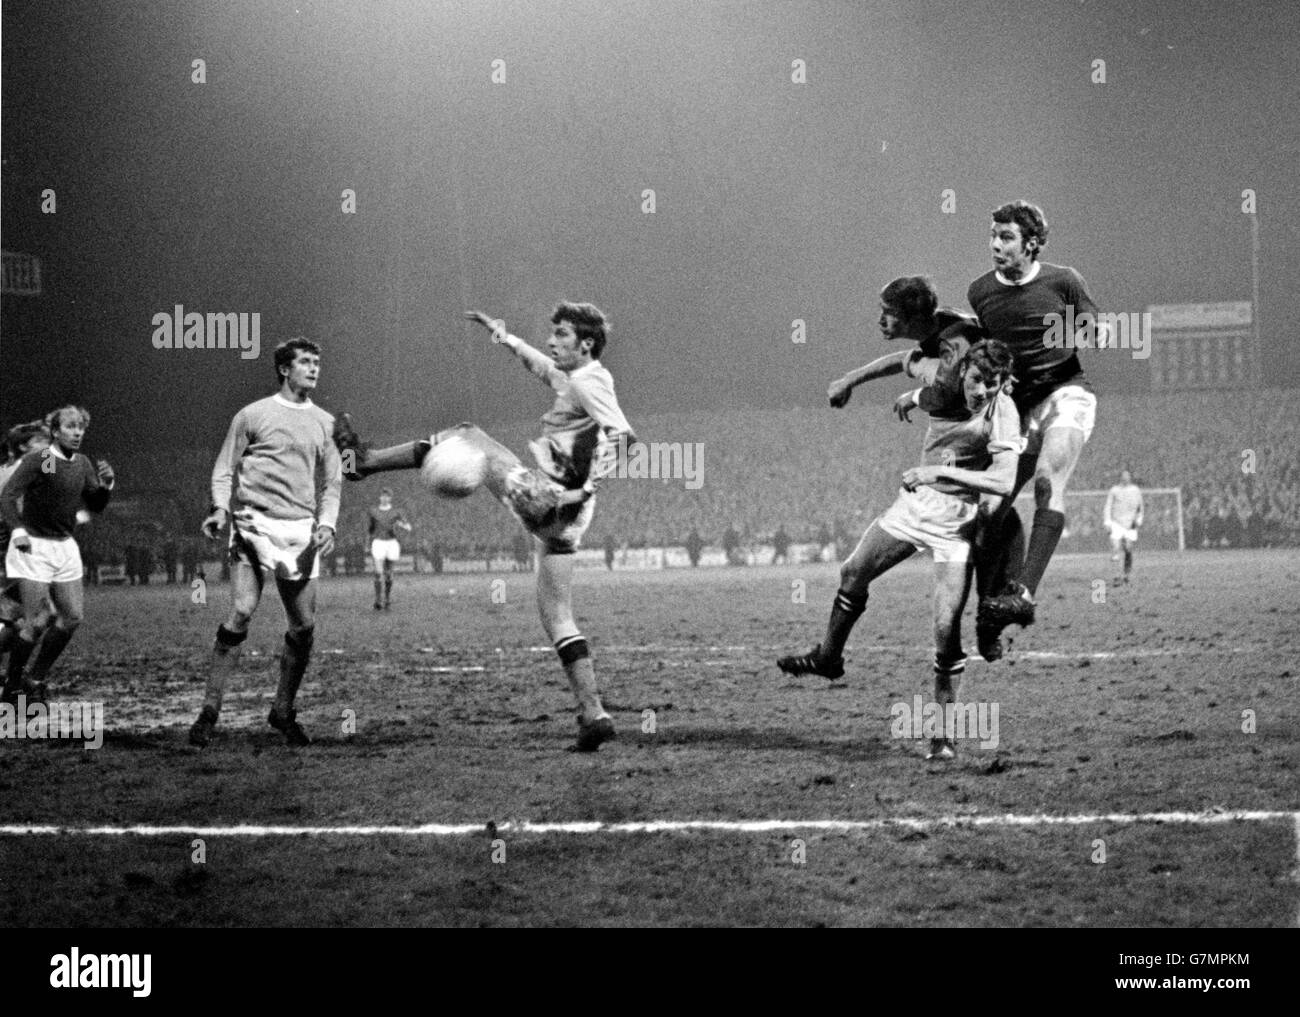 Manchester City's Tommy Booth (third l) blocks a header from Manchester United's Brian Kidd (r), watched by City's Mike Doyle (second l) and Tony Book (second r), and United's Paul Edwards (third r) and Bobby Charlton (l) Stock Photo